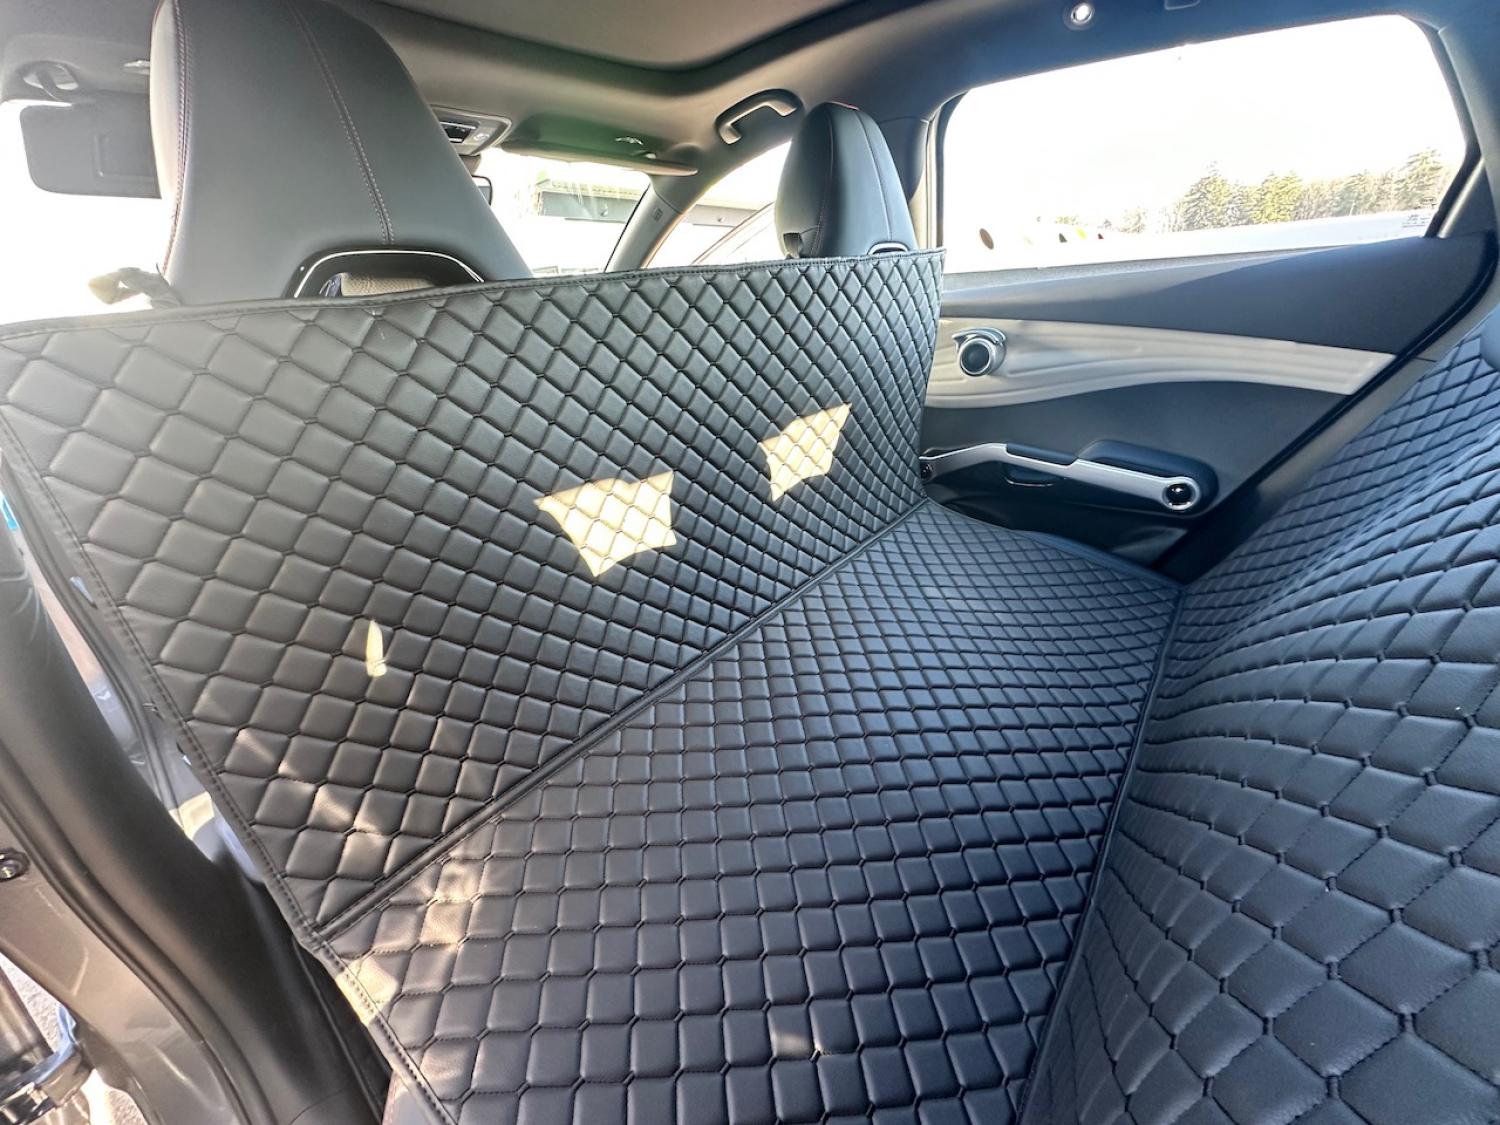 CARSTYLER® Back Seat Cover Geeignet Für MG ZS EV